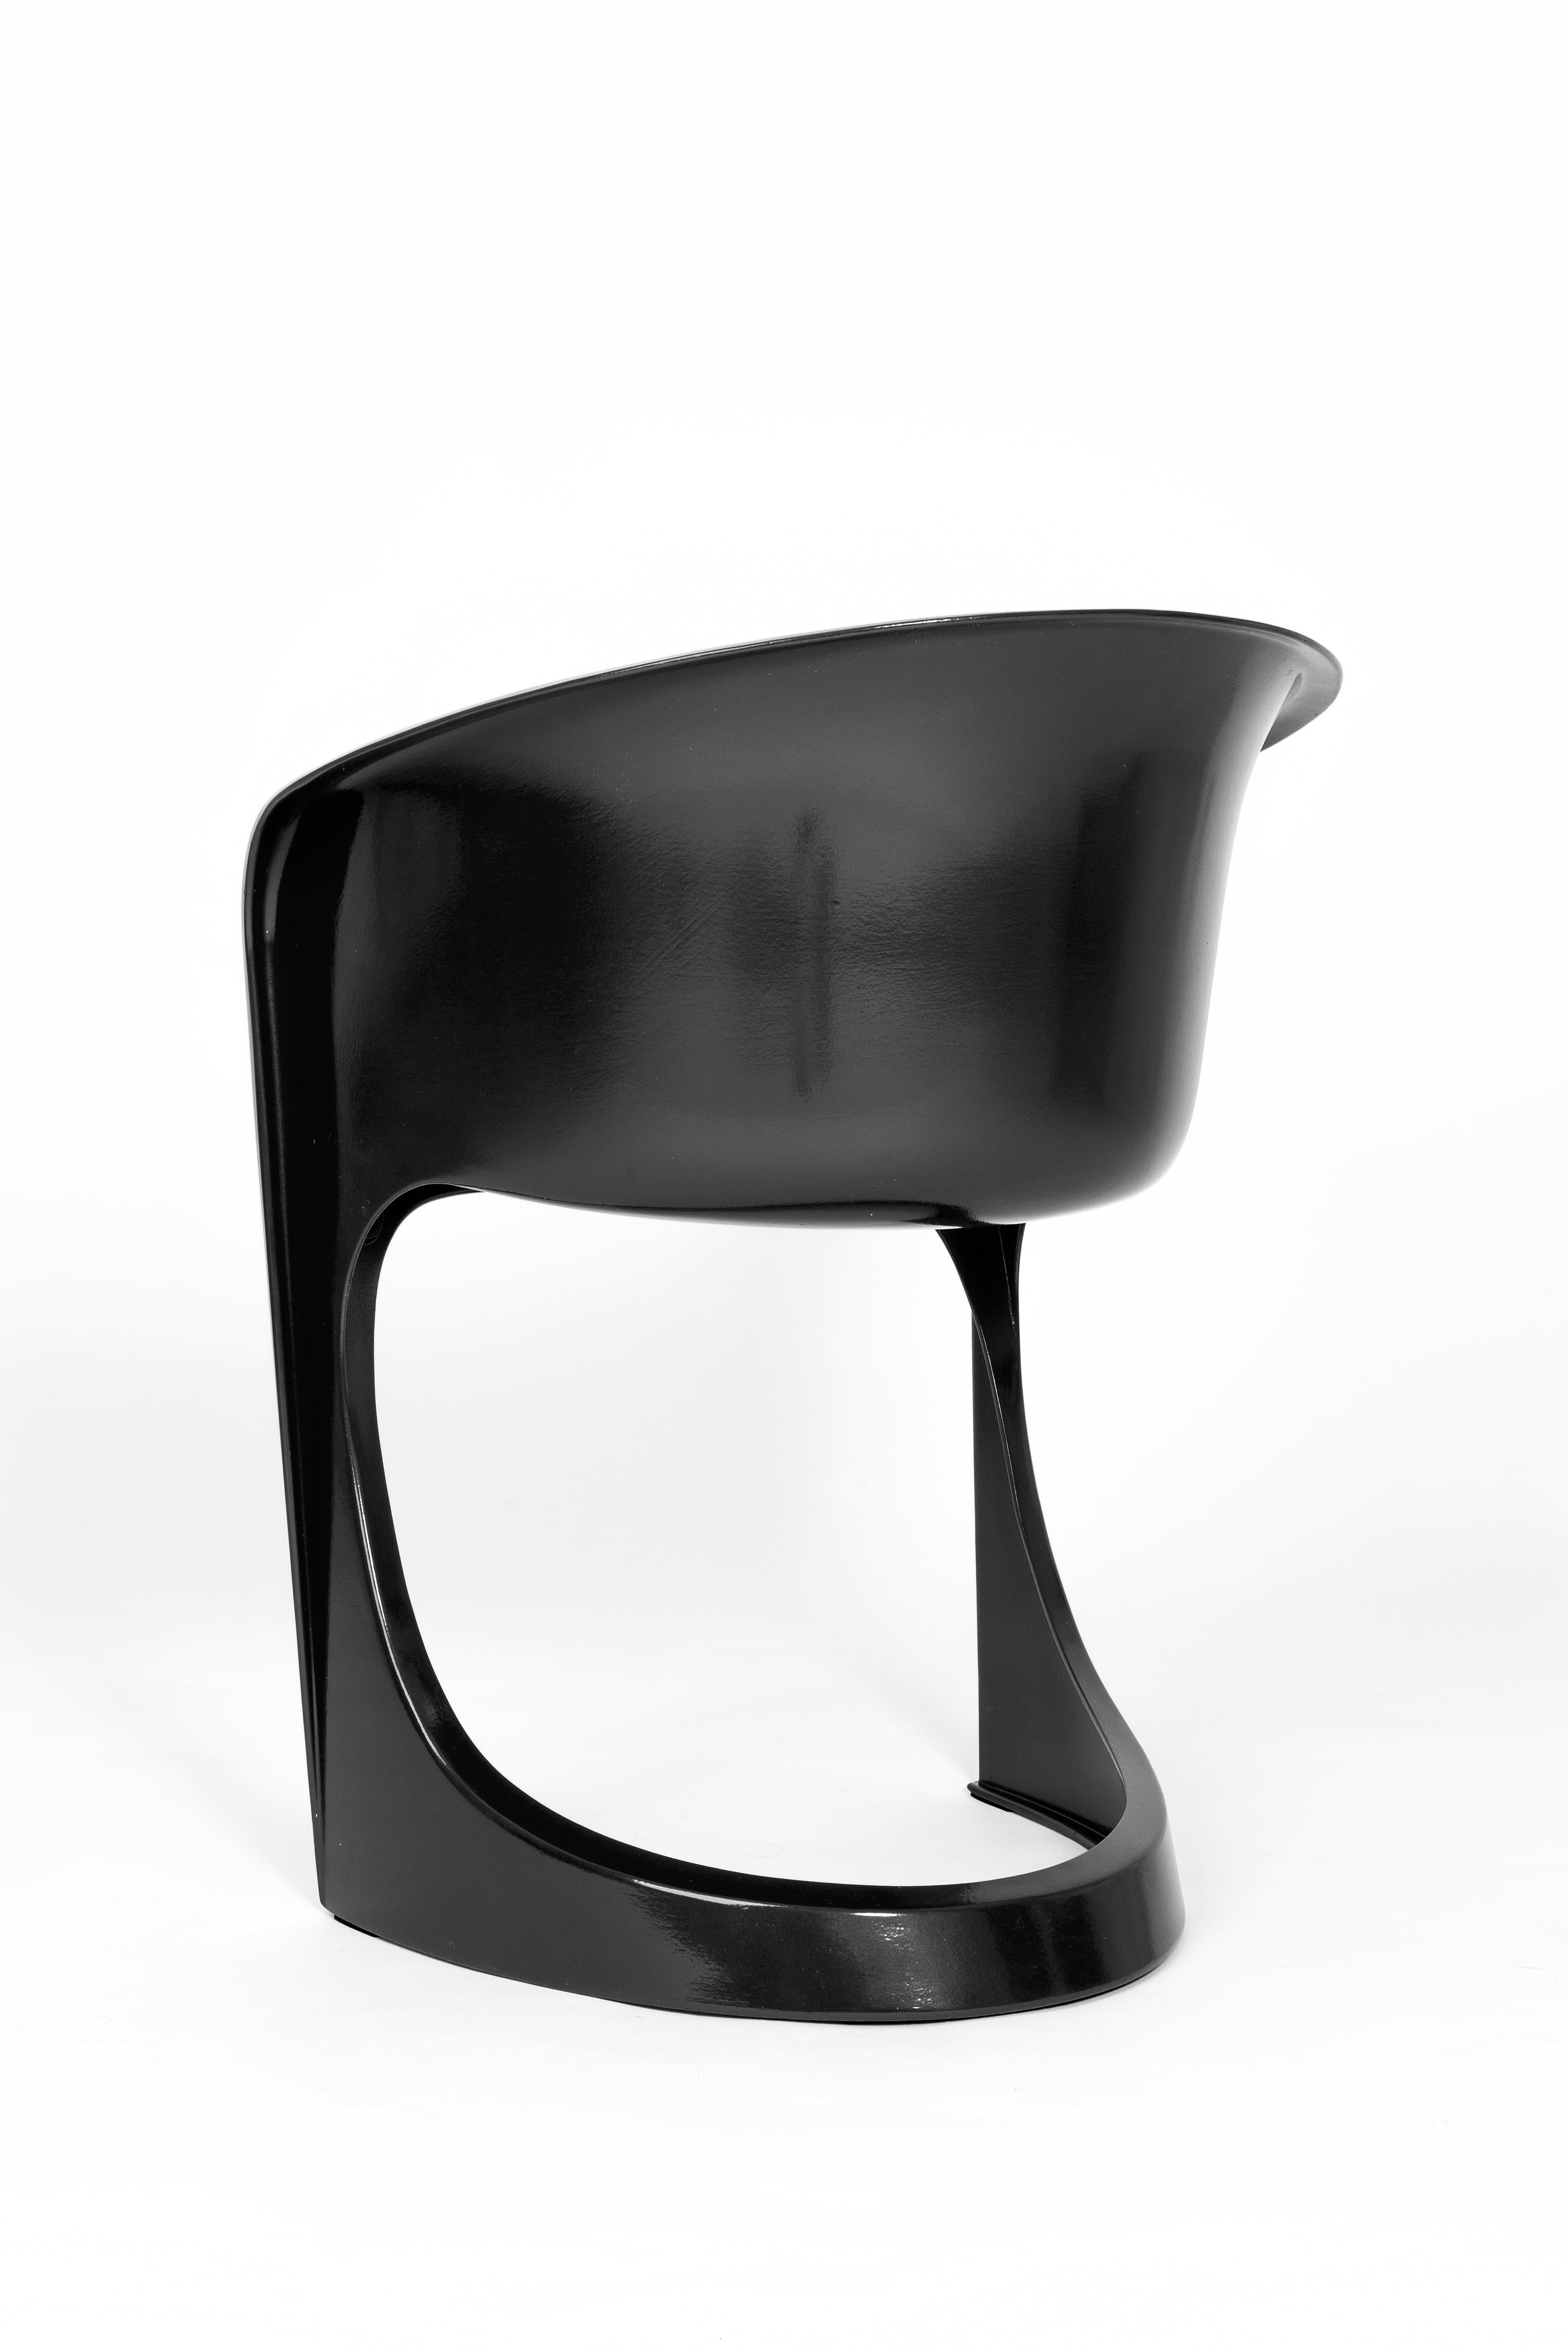 Set of Four Black Glossy Cado Chairs, Steen Østergaard, 1974 For Sale 1